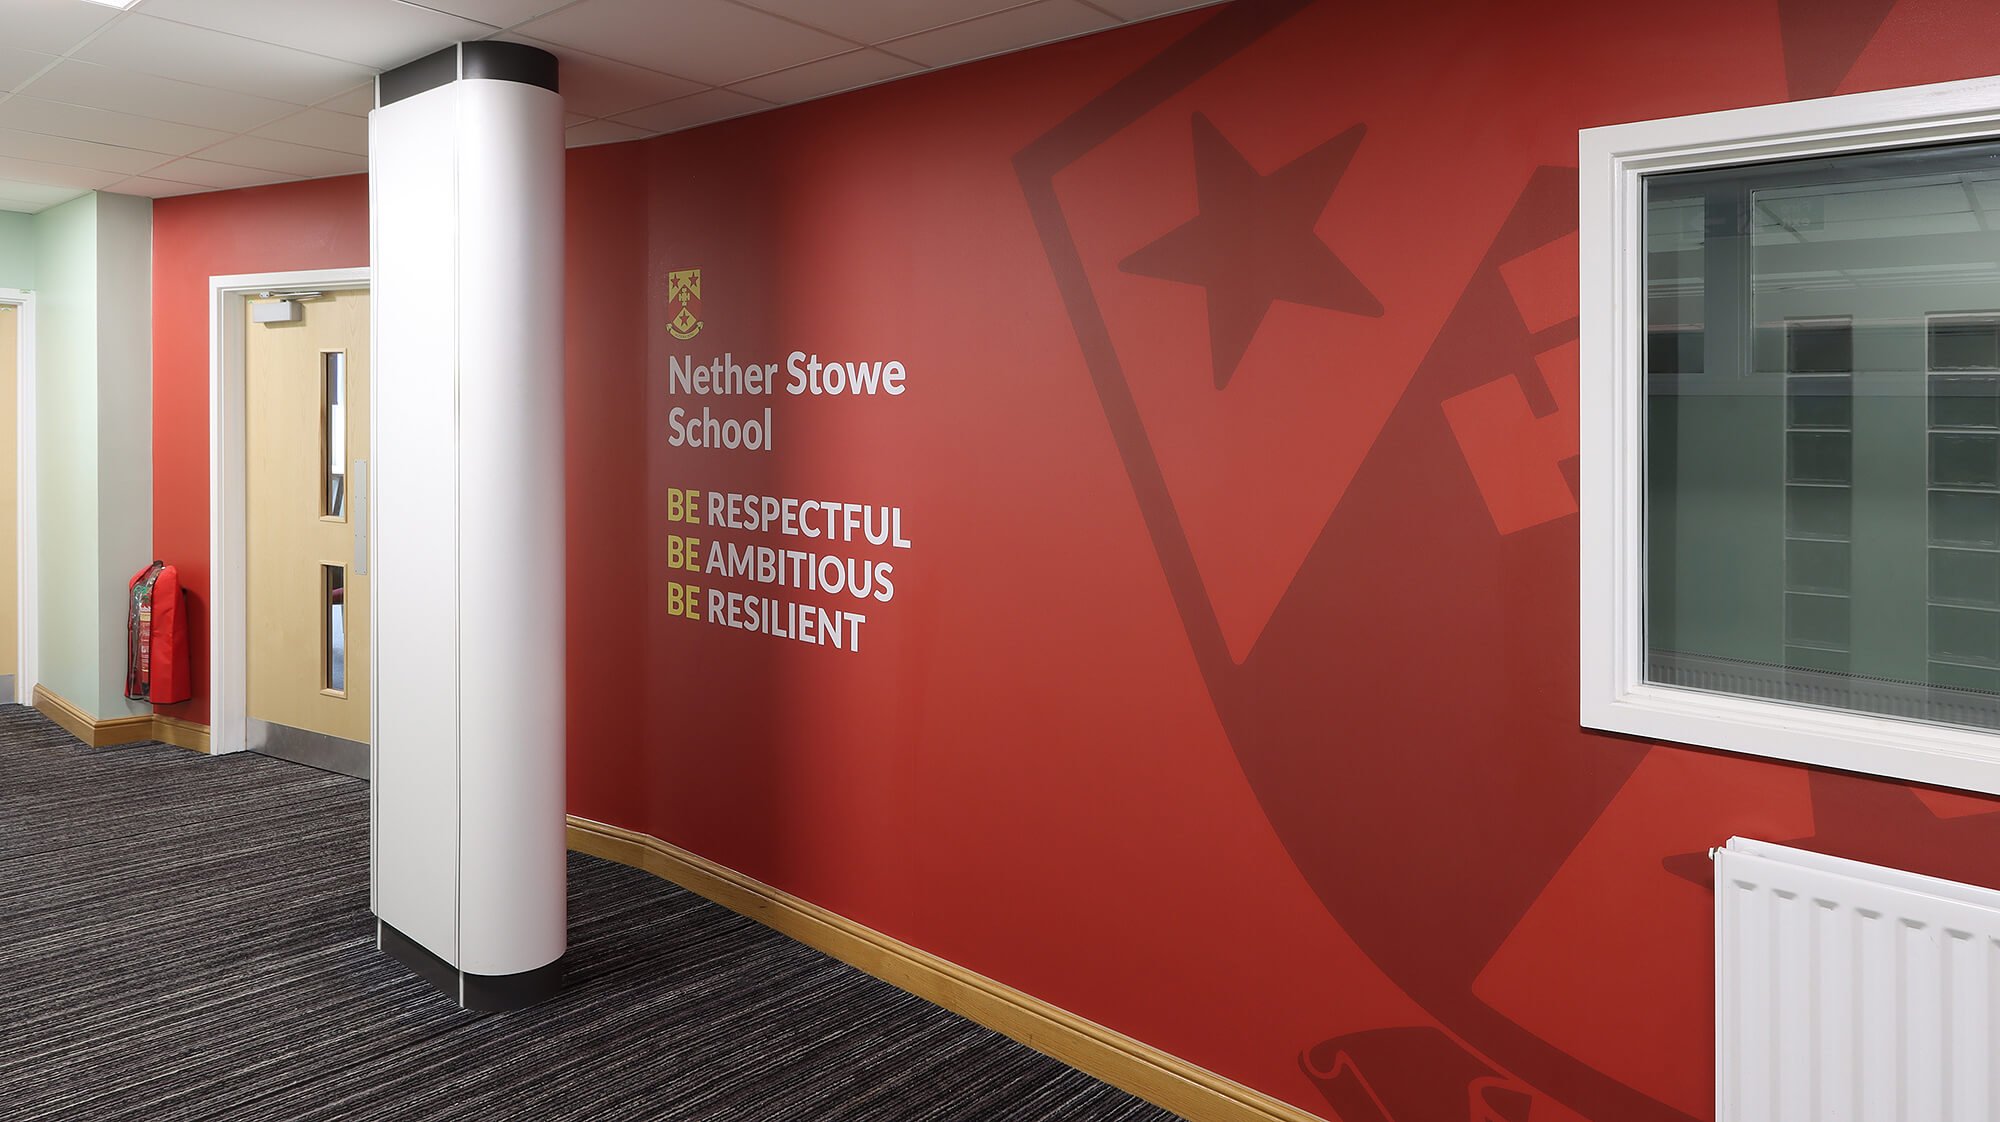 Nether Stowe School Welcome Wall Graphic 01.jpg